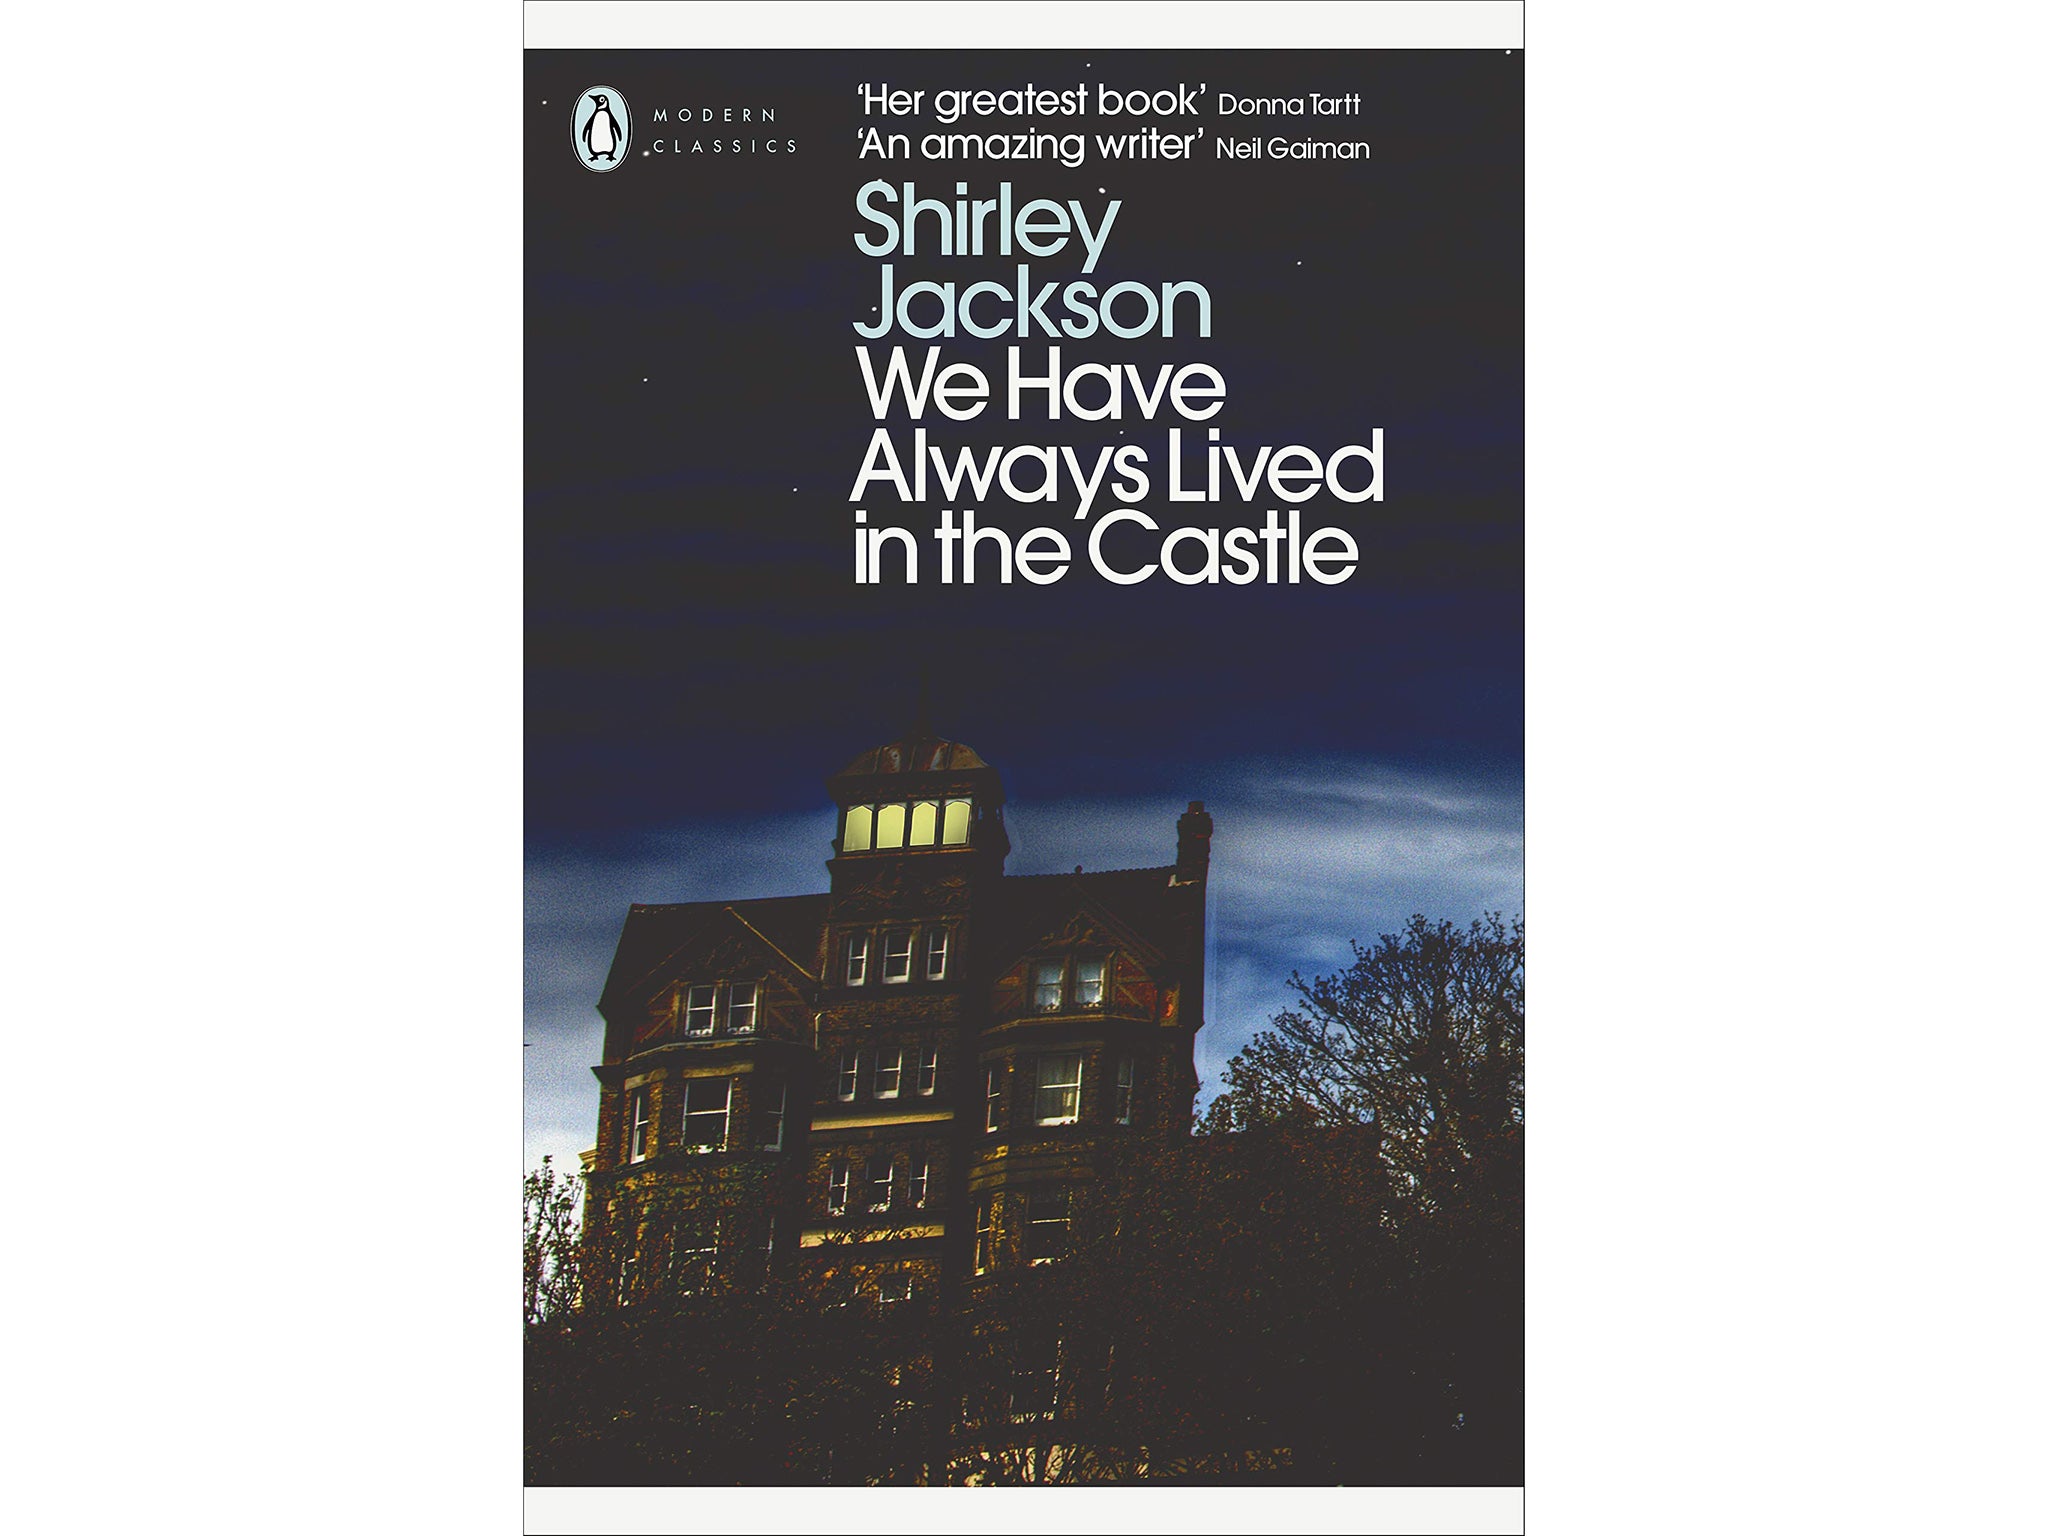 We Have Always Lived in the Castle - Shirley Jackson.jpg